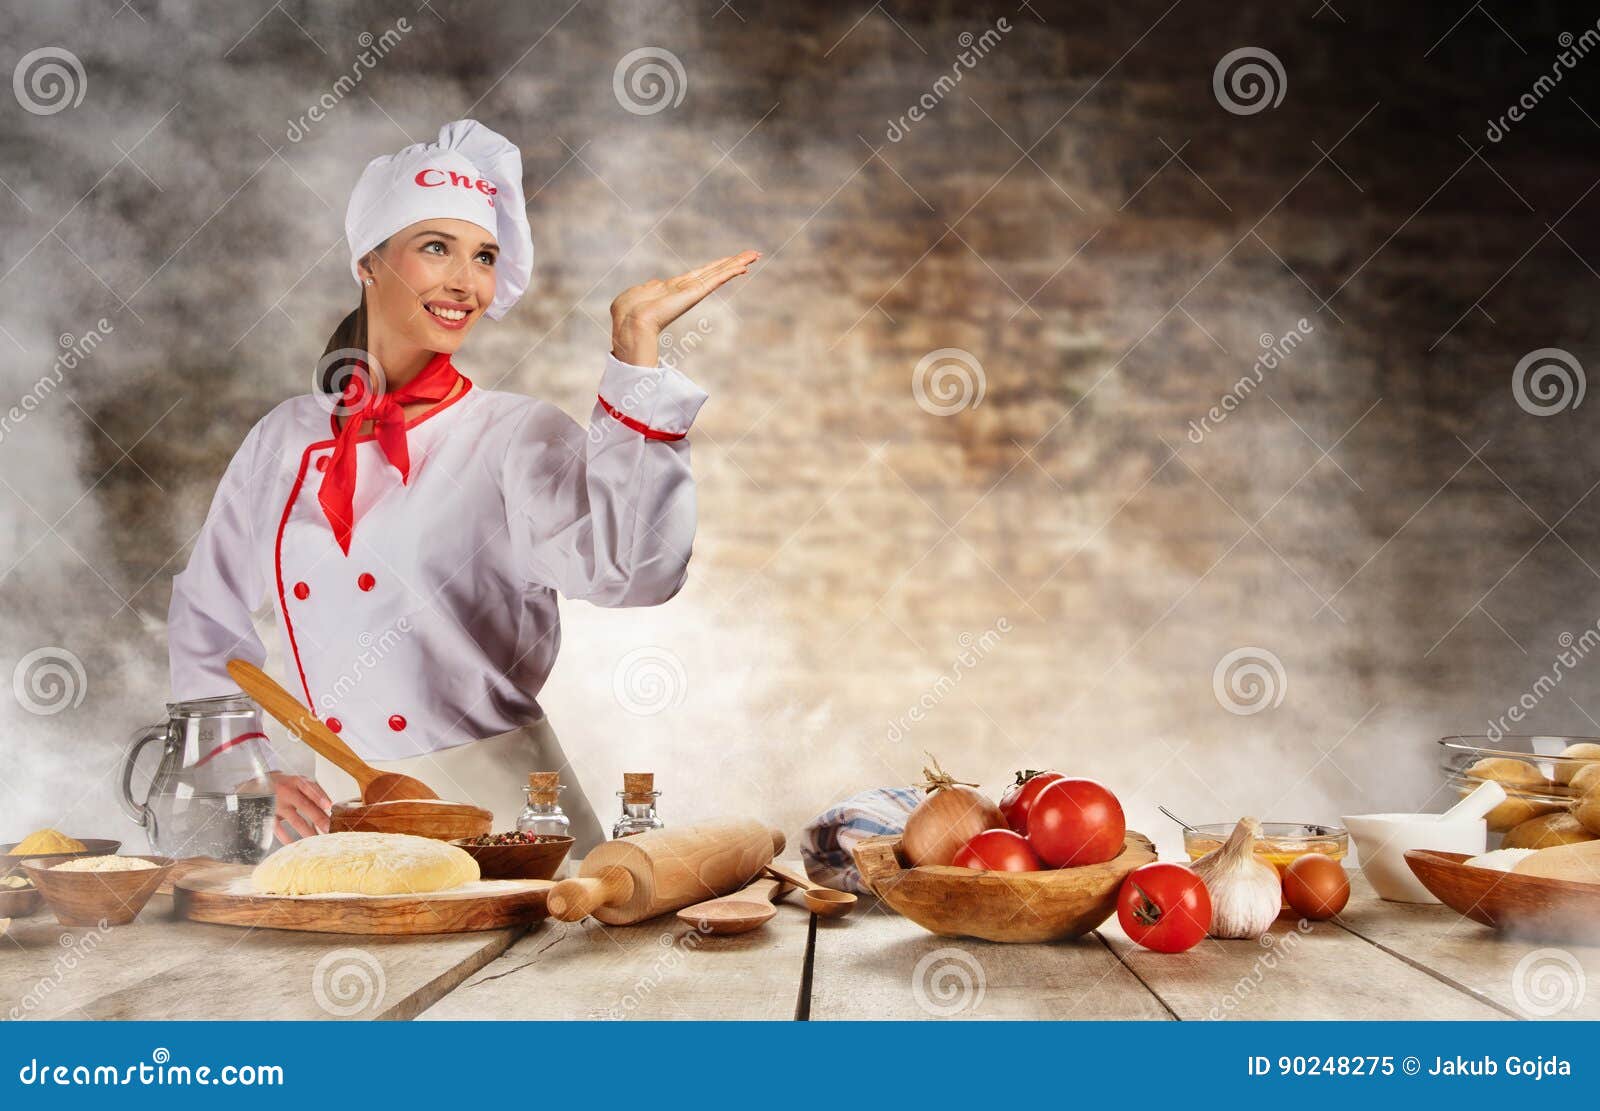 14,830 Cooker Girl Royalty-Free Photos and Stock Images